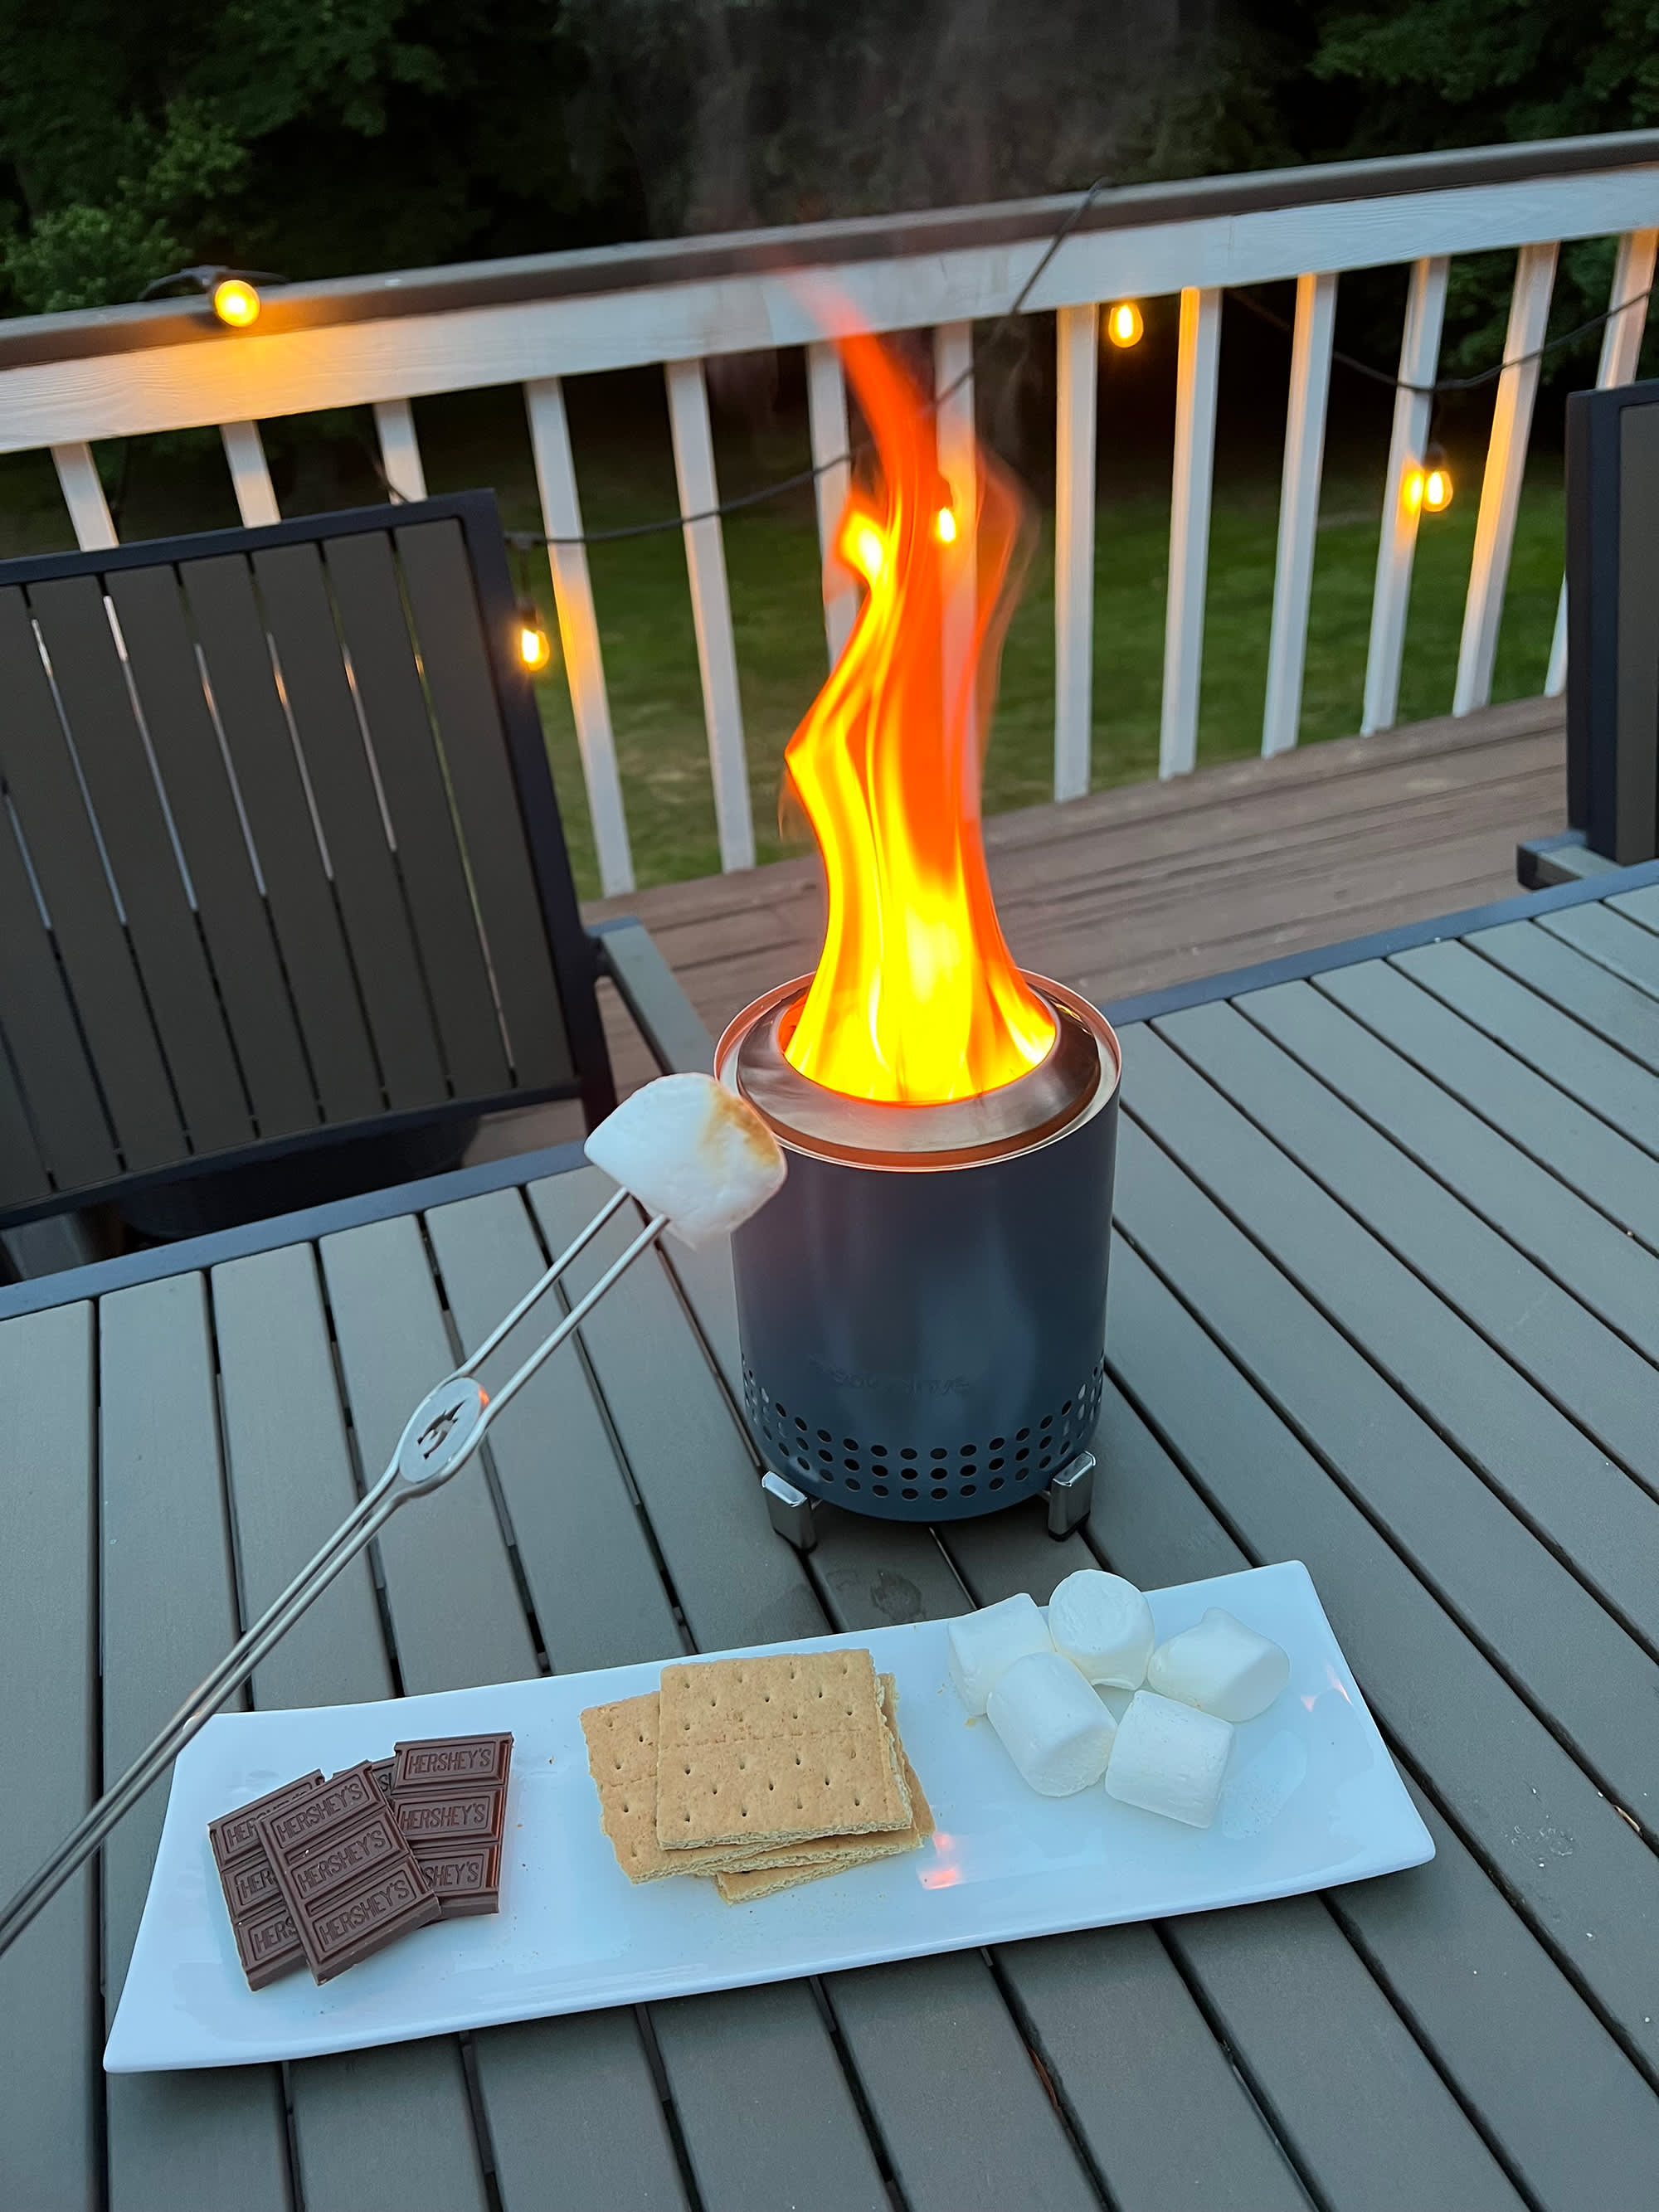 https://cdn.apartmenttherapy.info/image/upload/v1687295131/k/Edit/2023-06-solo-stove-mesa-tabletop-fire-pit-review/solo-stove-mesa-tabletop-fire-pit-review-6012.jpg